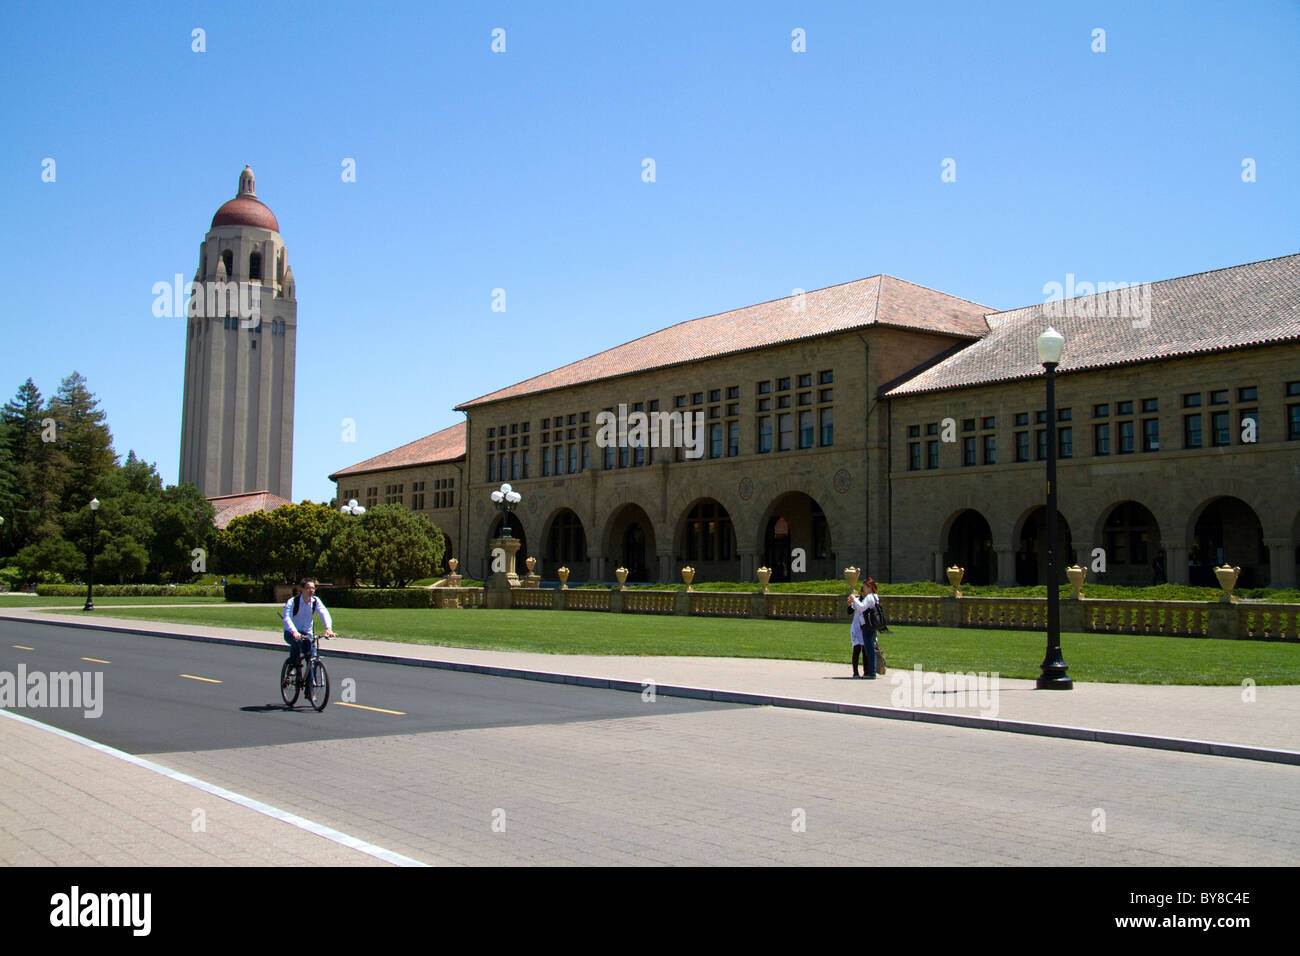 Hoover Tower on the Stanford University campus in Palo Alto, California, USA. Stock Photo